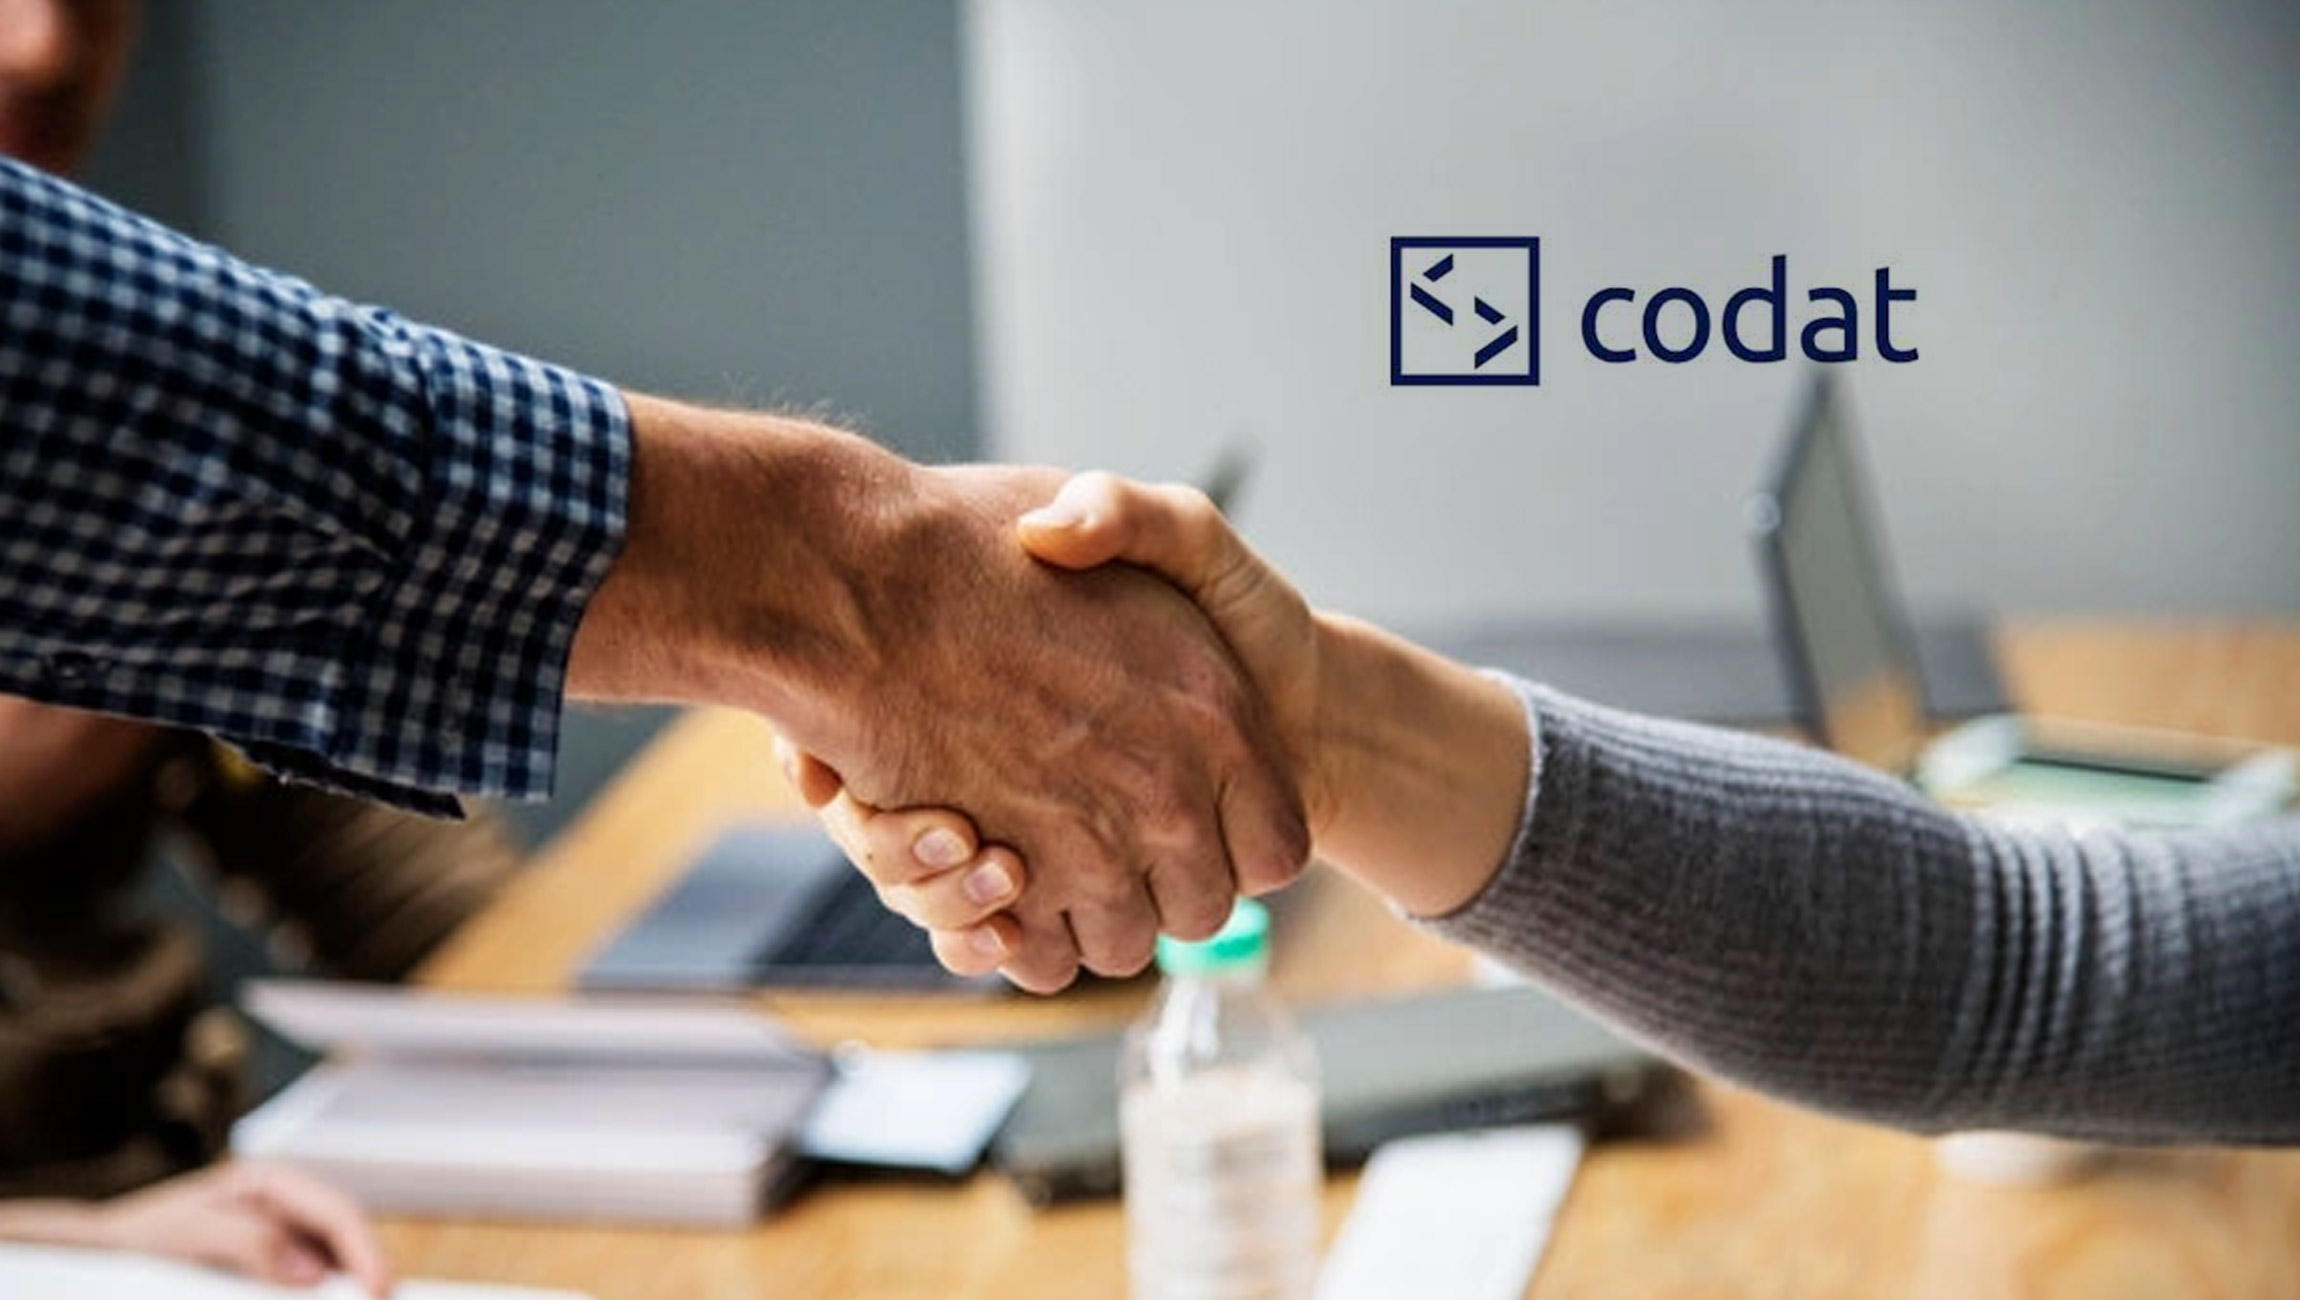 Codat Announces Partnership With Moody's Analytics to Improve Small Business Lending